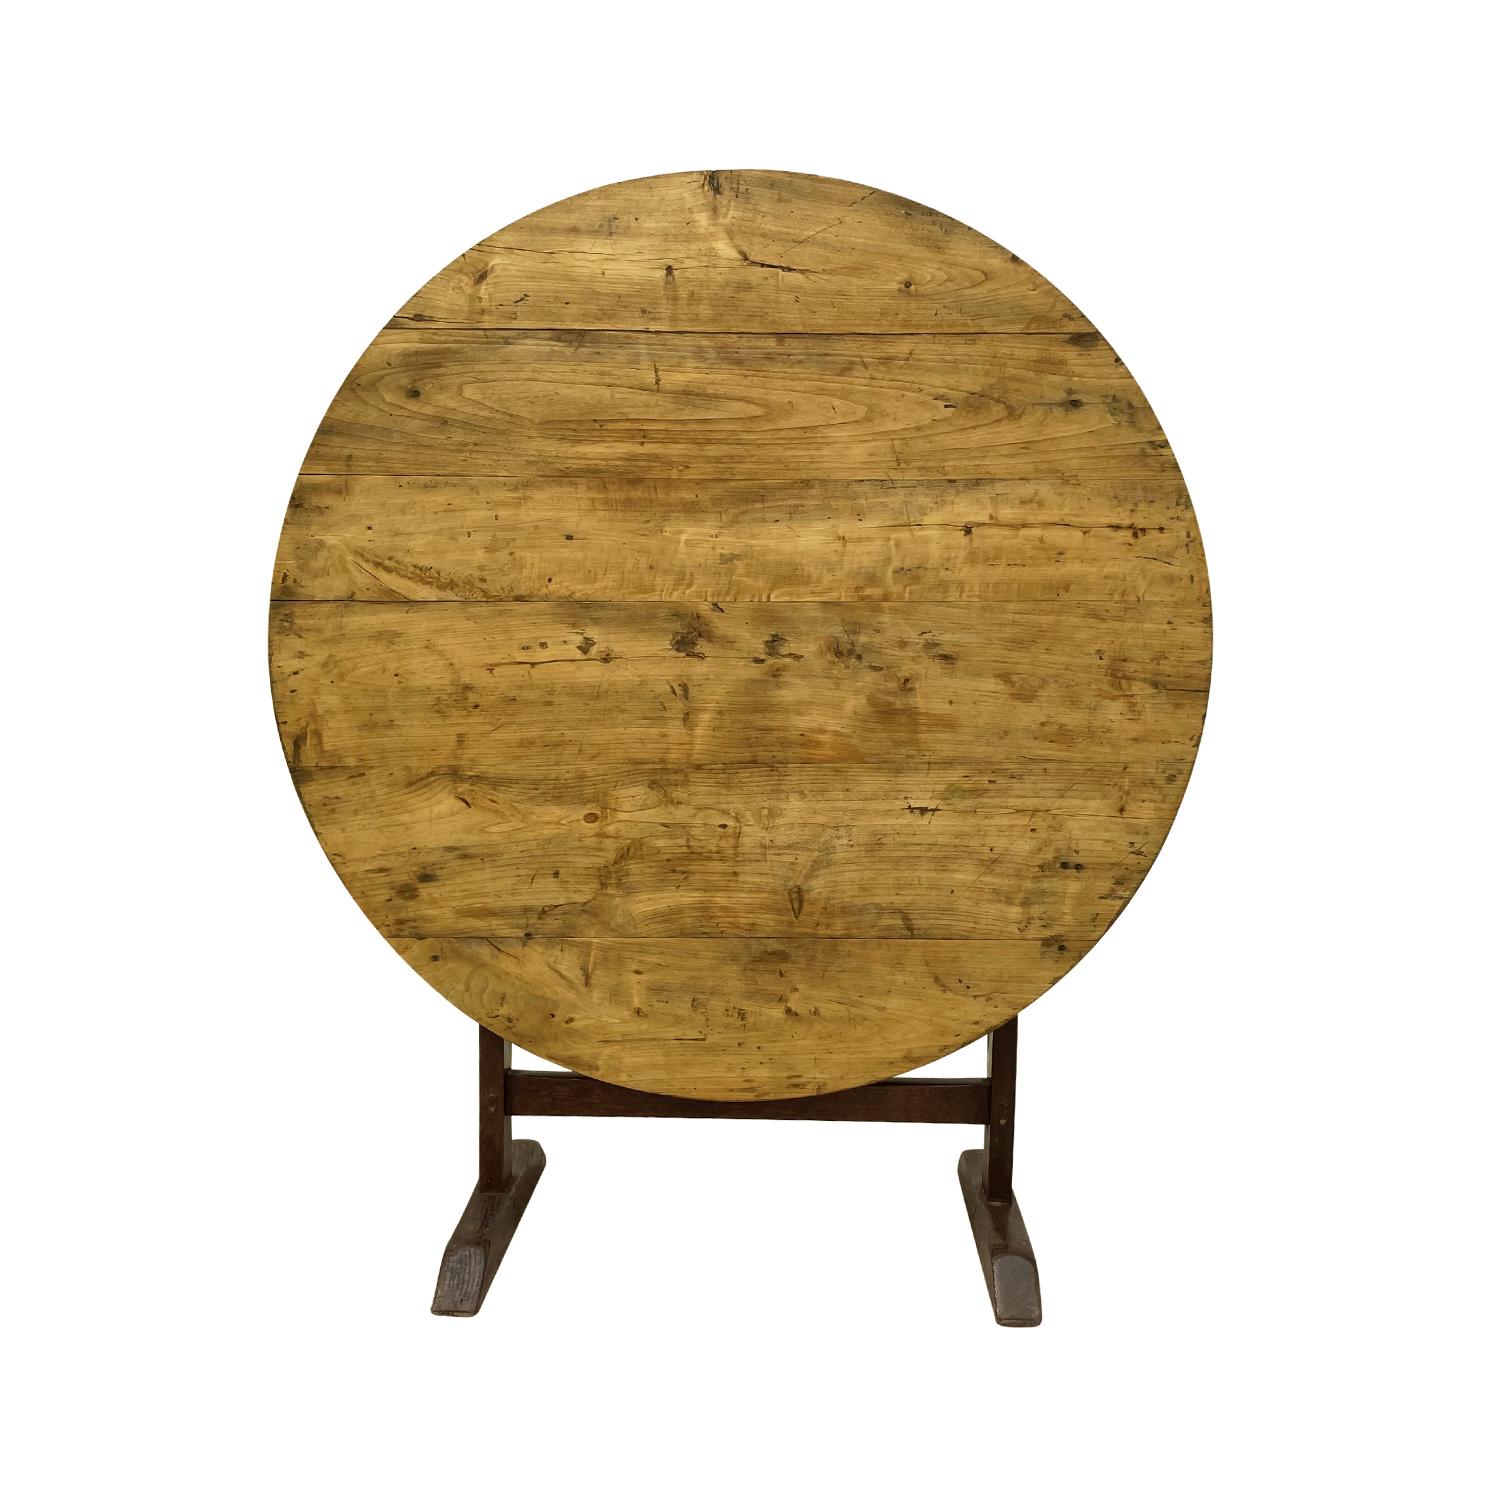 A small, round antique French Provincial wine folding table made of hand crafted Walnut, in good condition. The Vigneron tables are used in France as occasional tables in wine cellars. Minor fading, scratches due to age. Wear consistent with age and